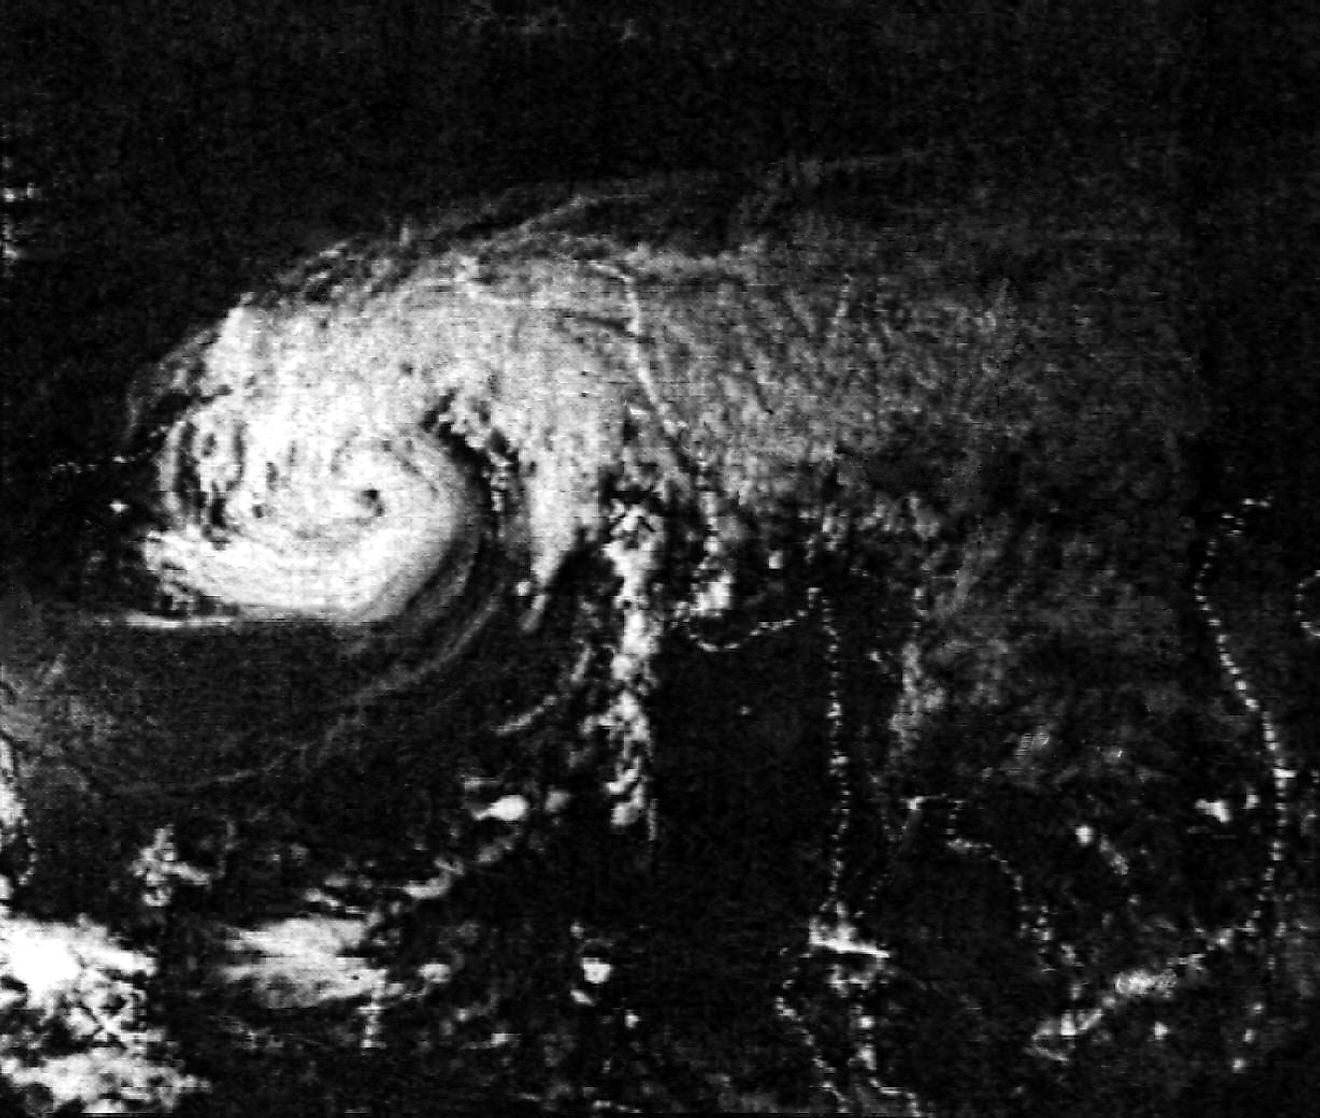 Image of the Bhola cyclone taken on November 11, 1970.